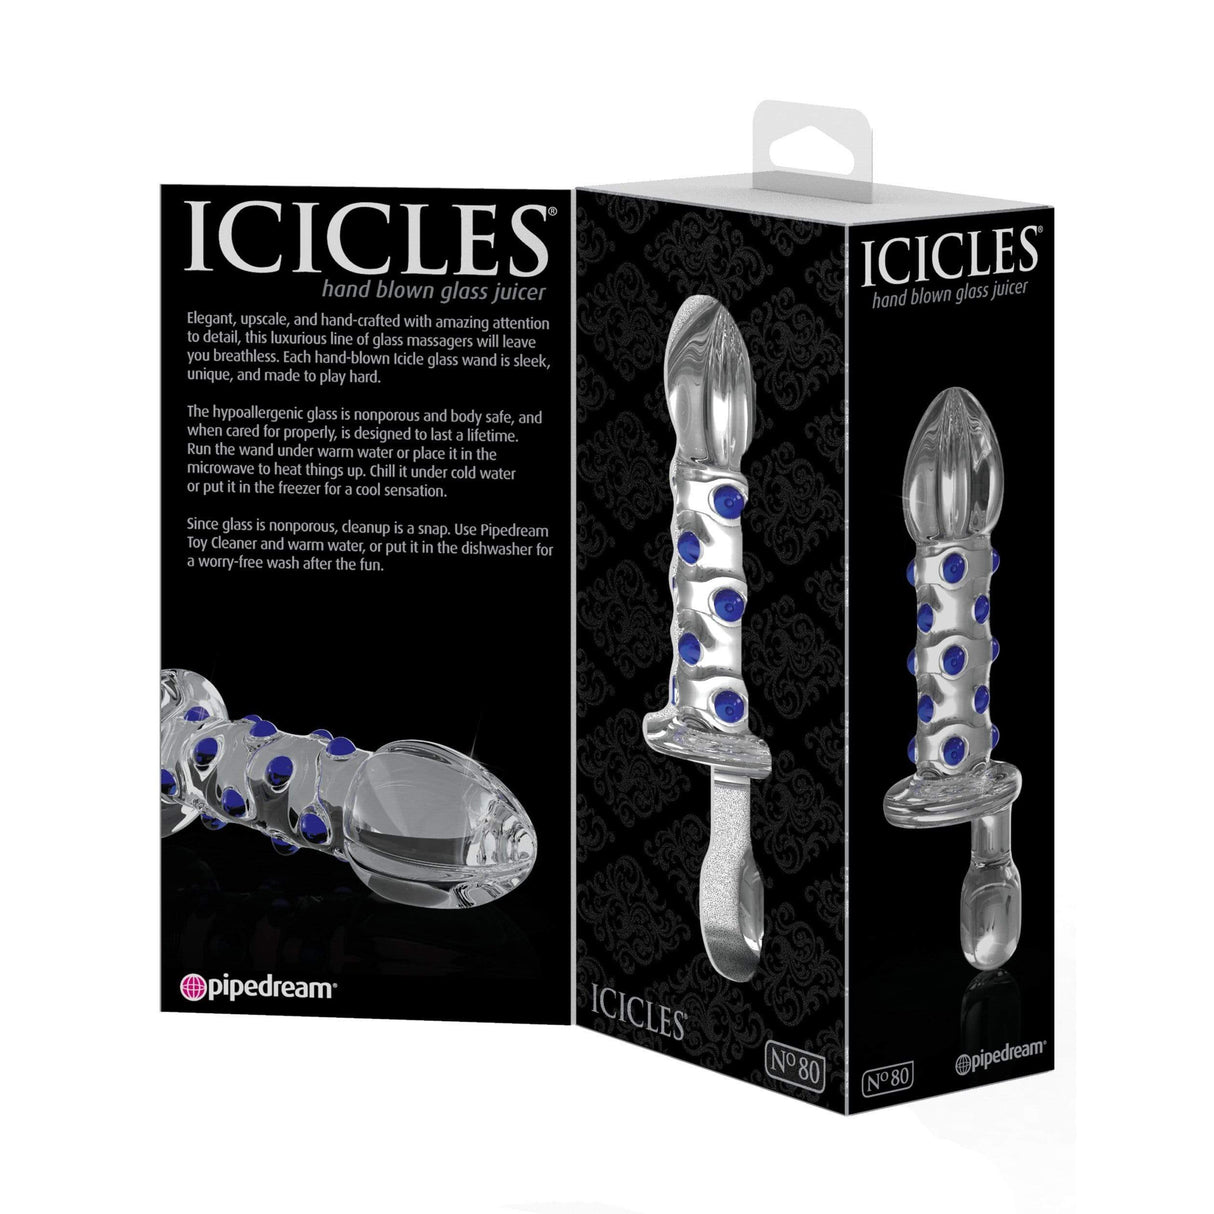 Pipedream - Icicles No 80 Hand Blown Juicer (Clear) PD1662 CherryAffairs